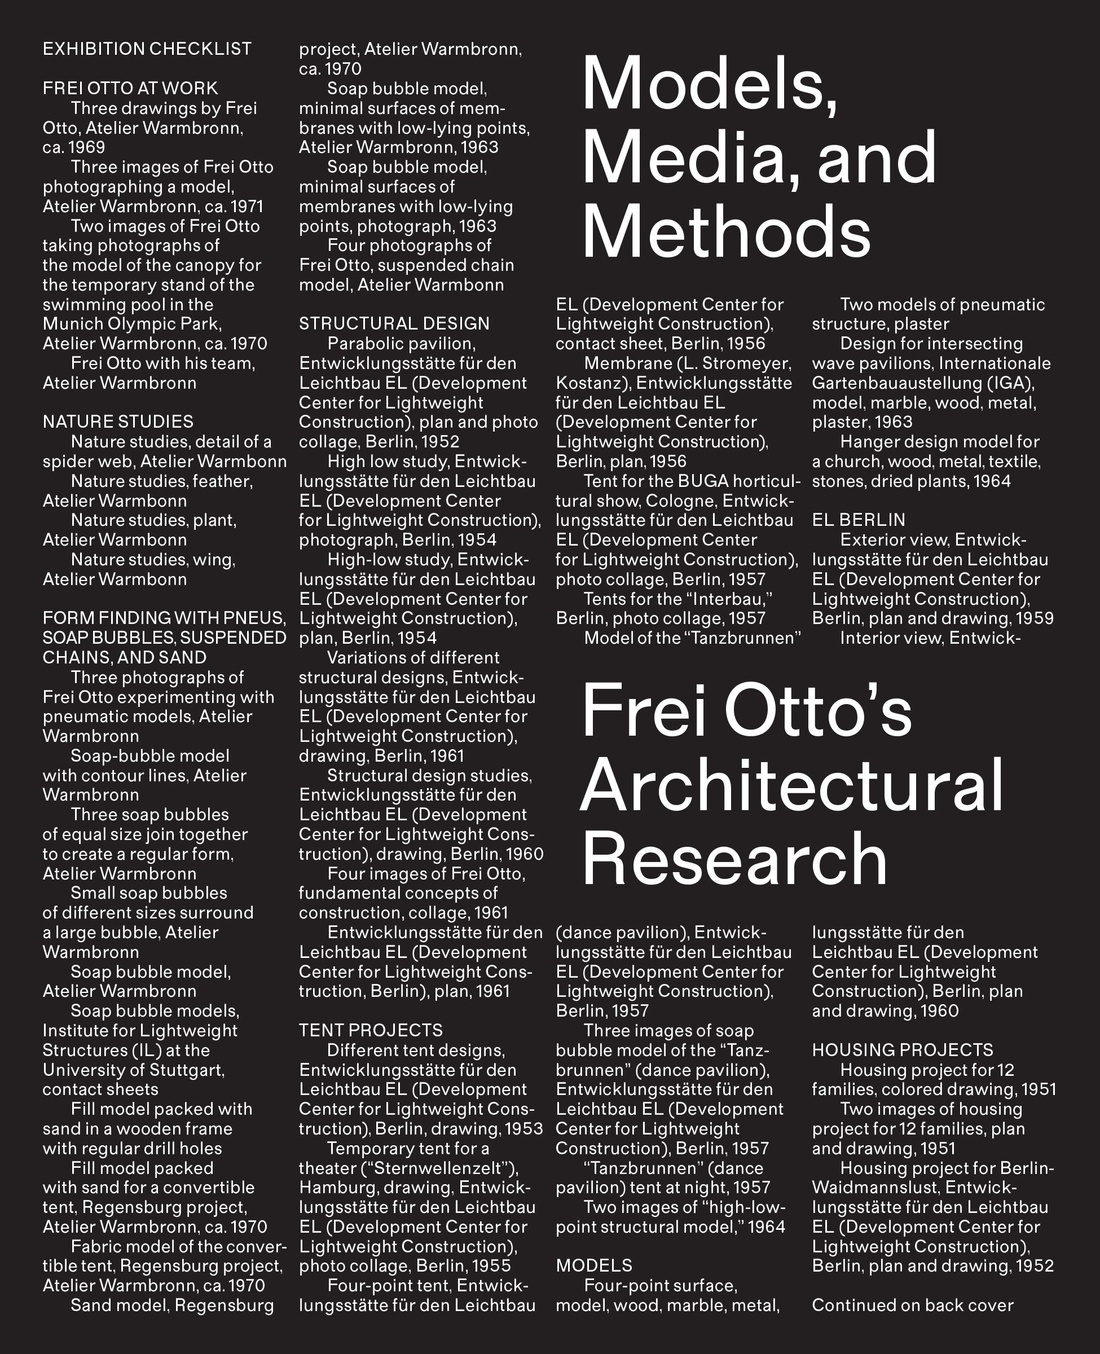 Models, Media, and Methods: Frei Otto's Architectural Research